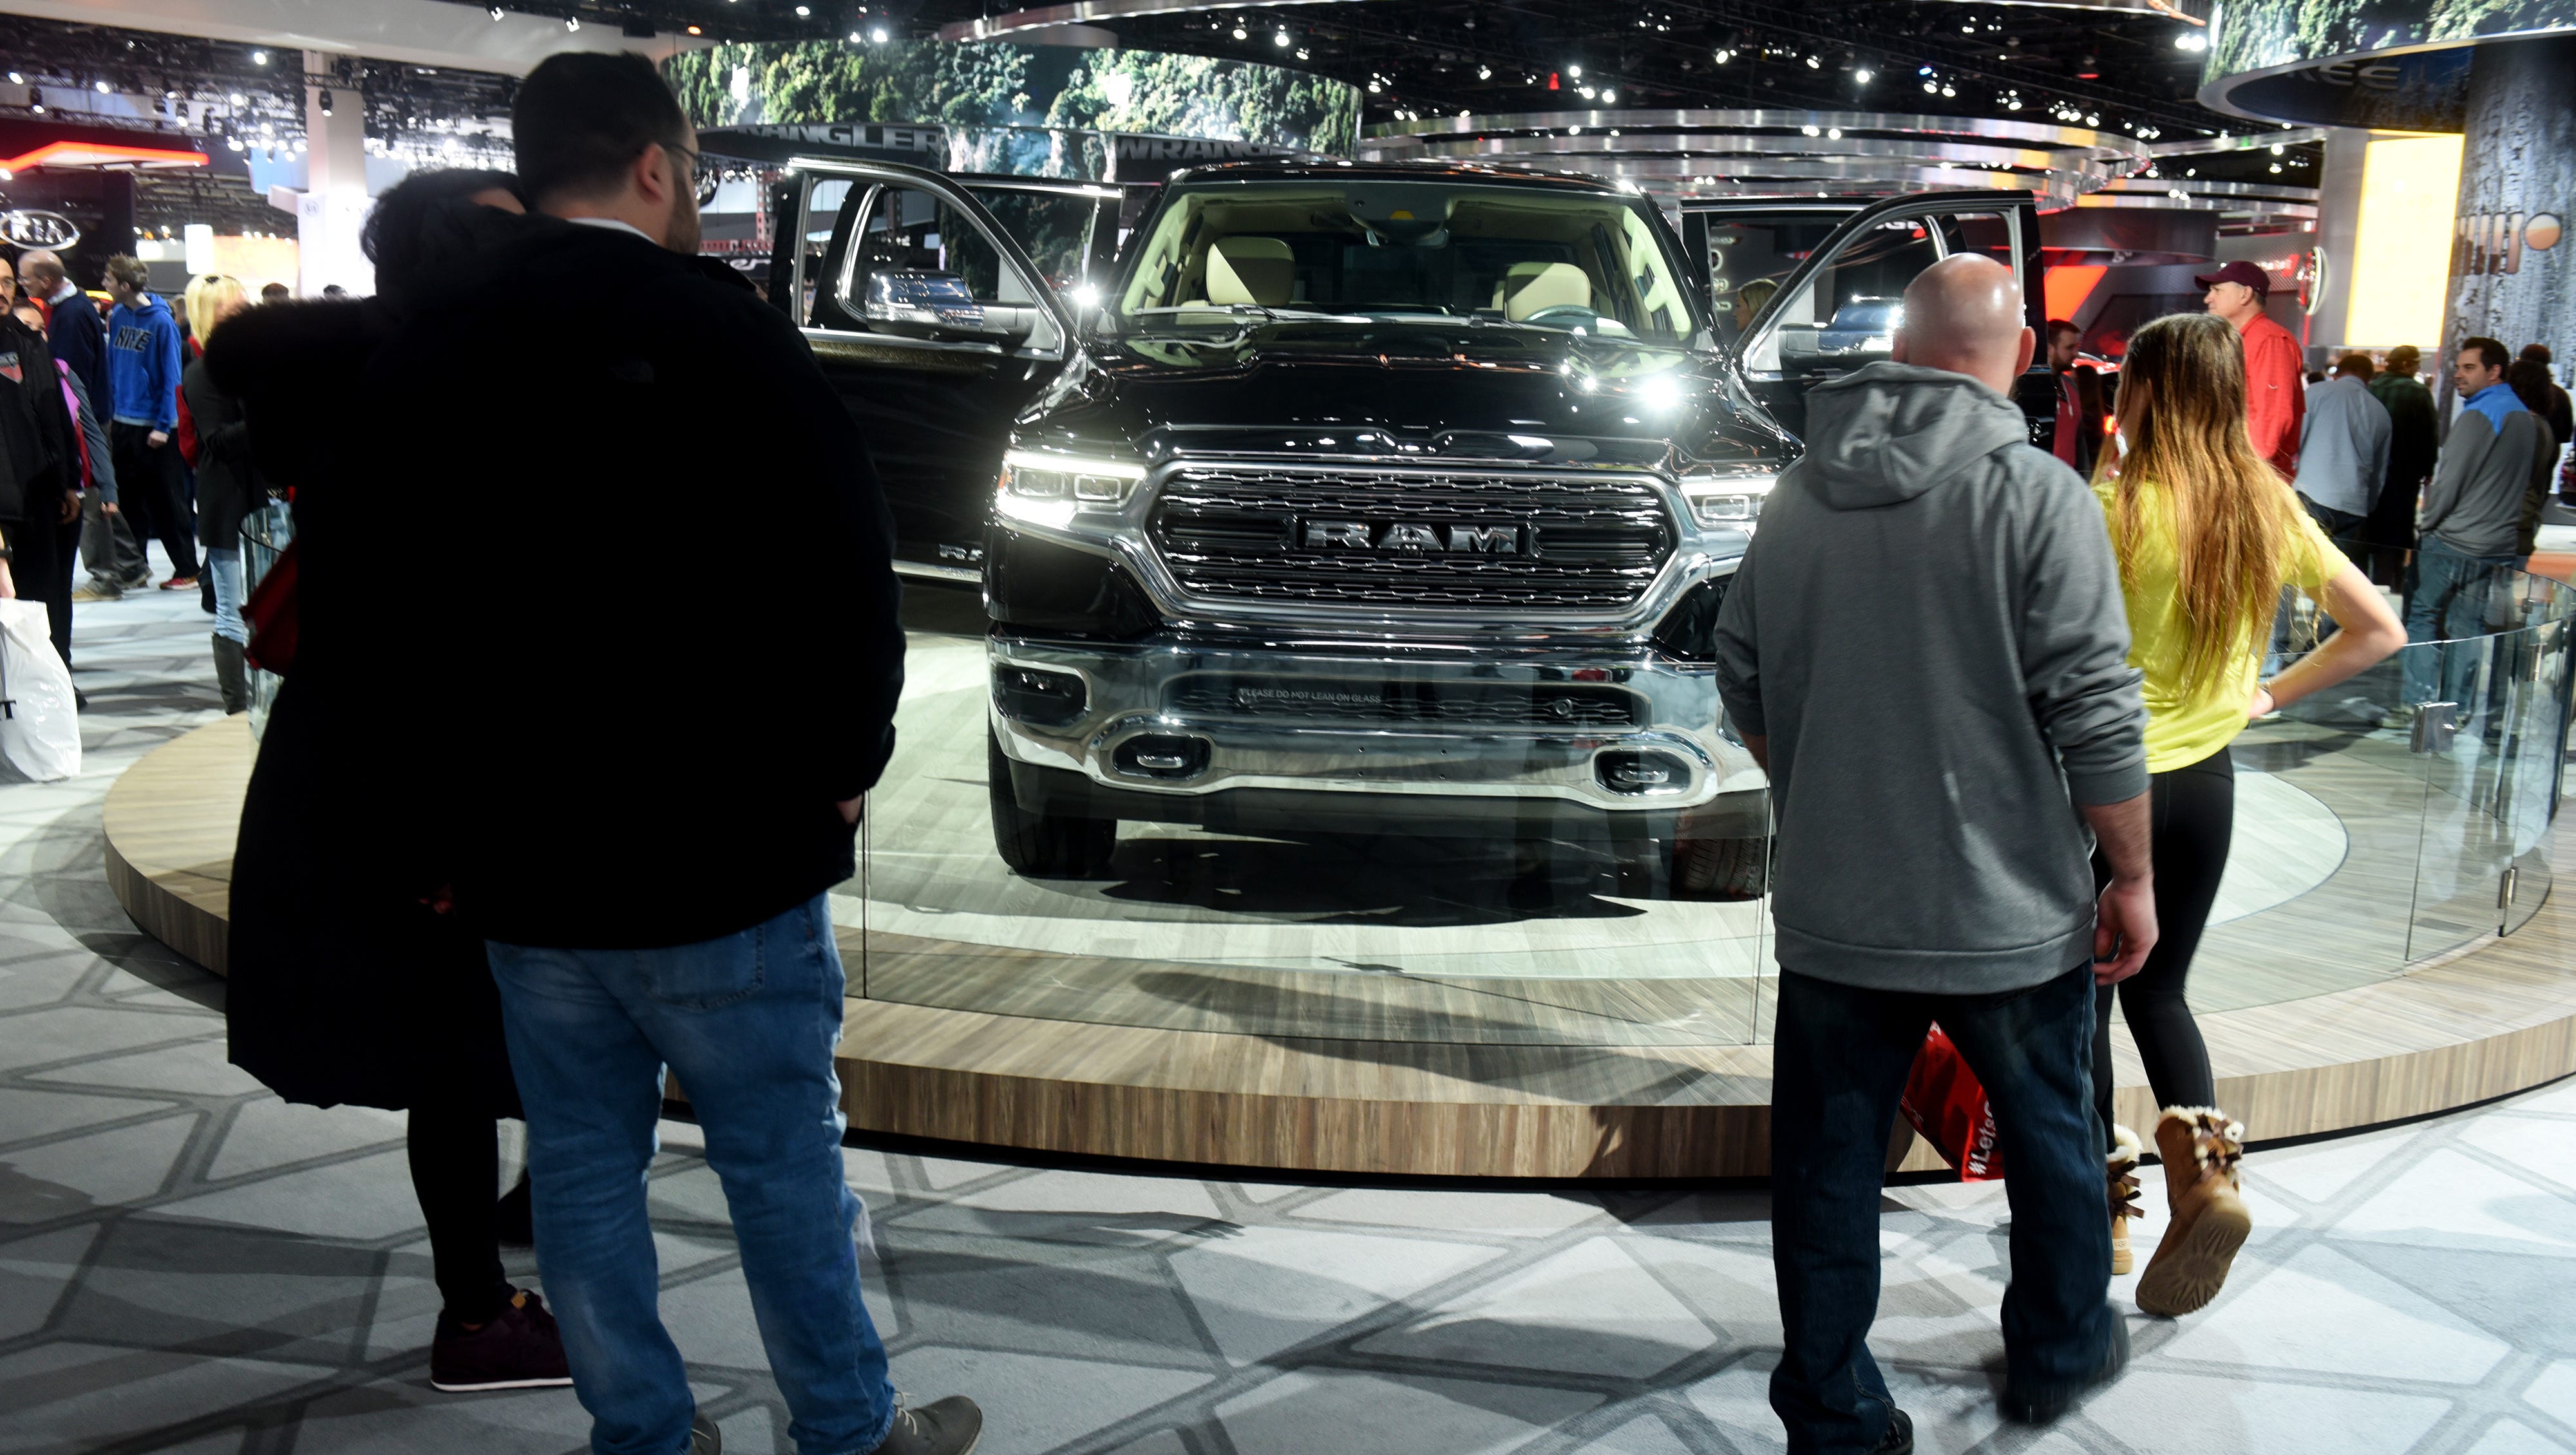 People surround the All-New 2019 Dodge Ram 1500 Limited on Saturday, January 20, 2018.